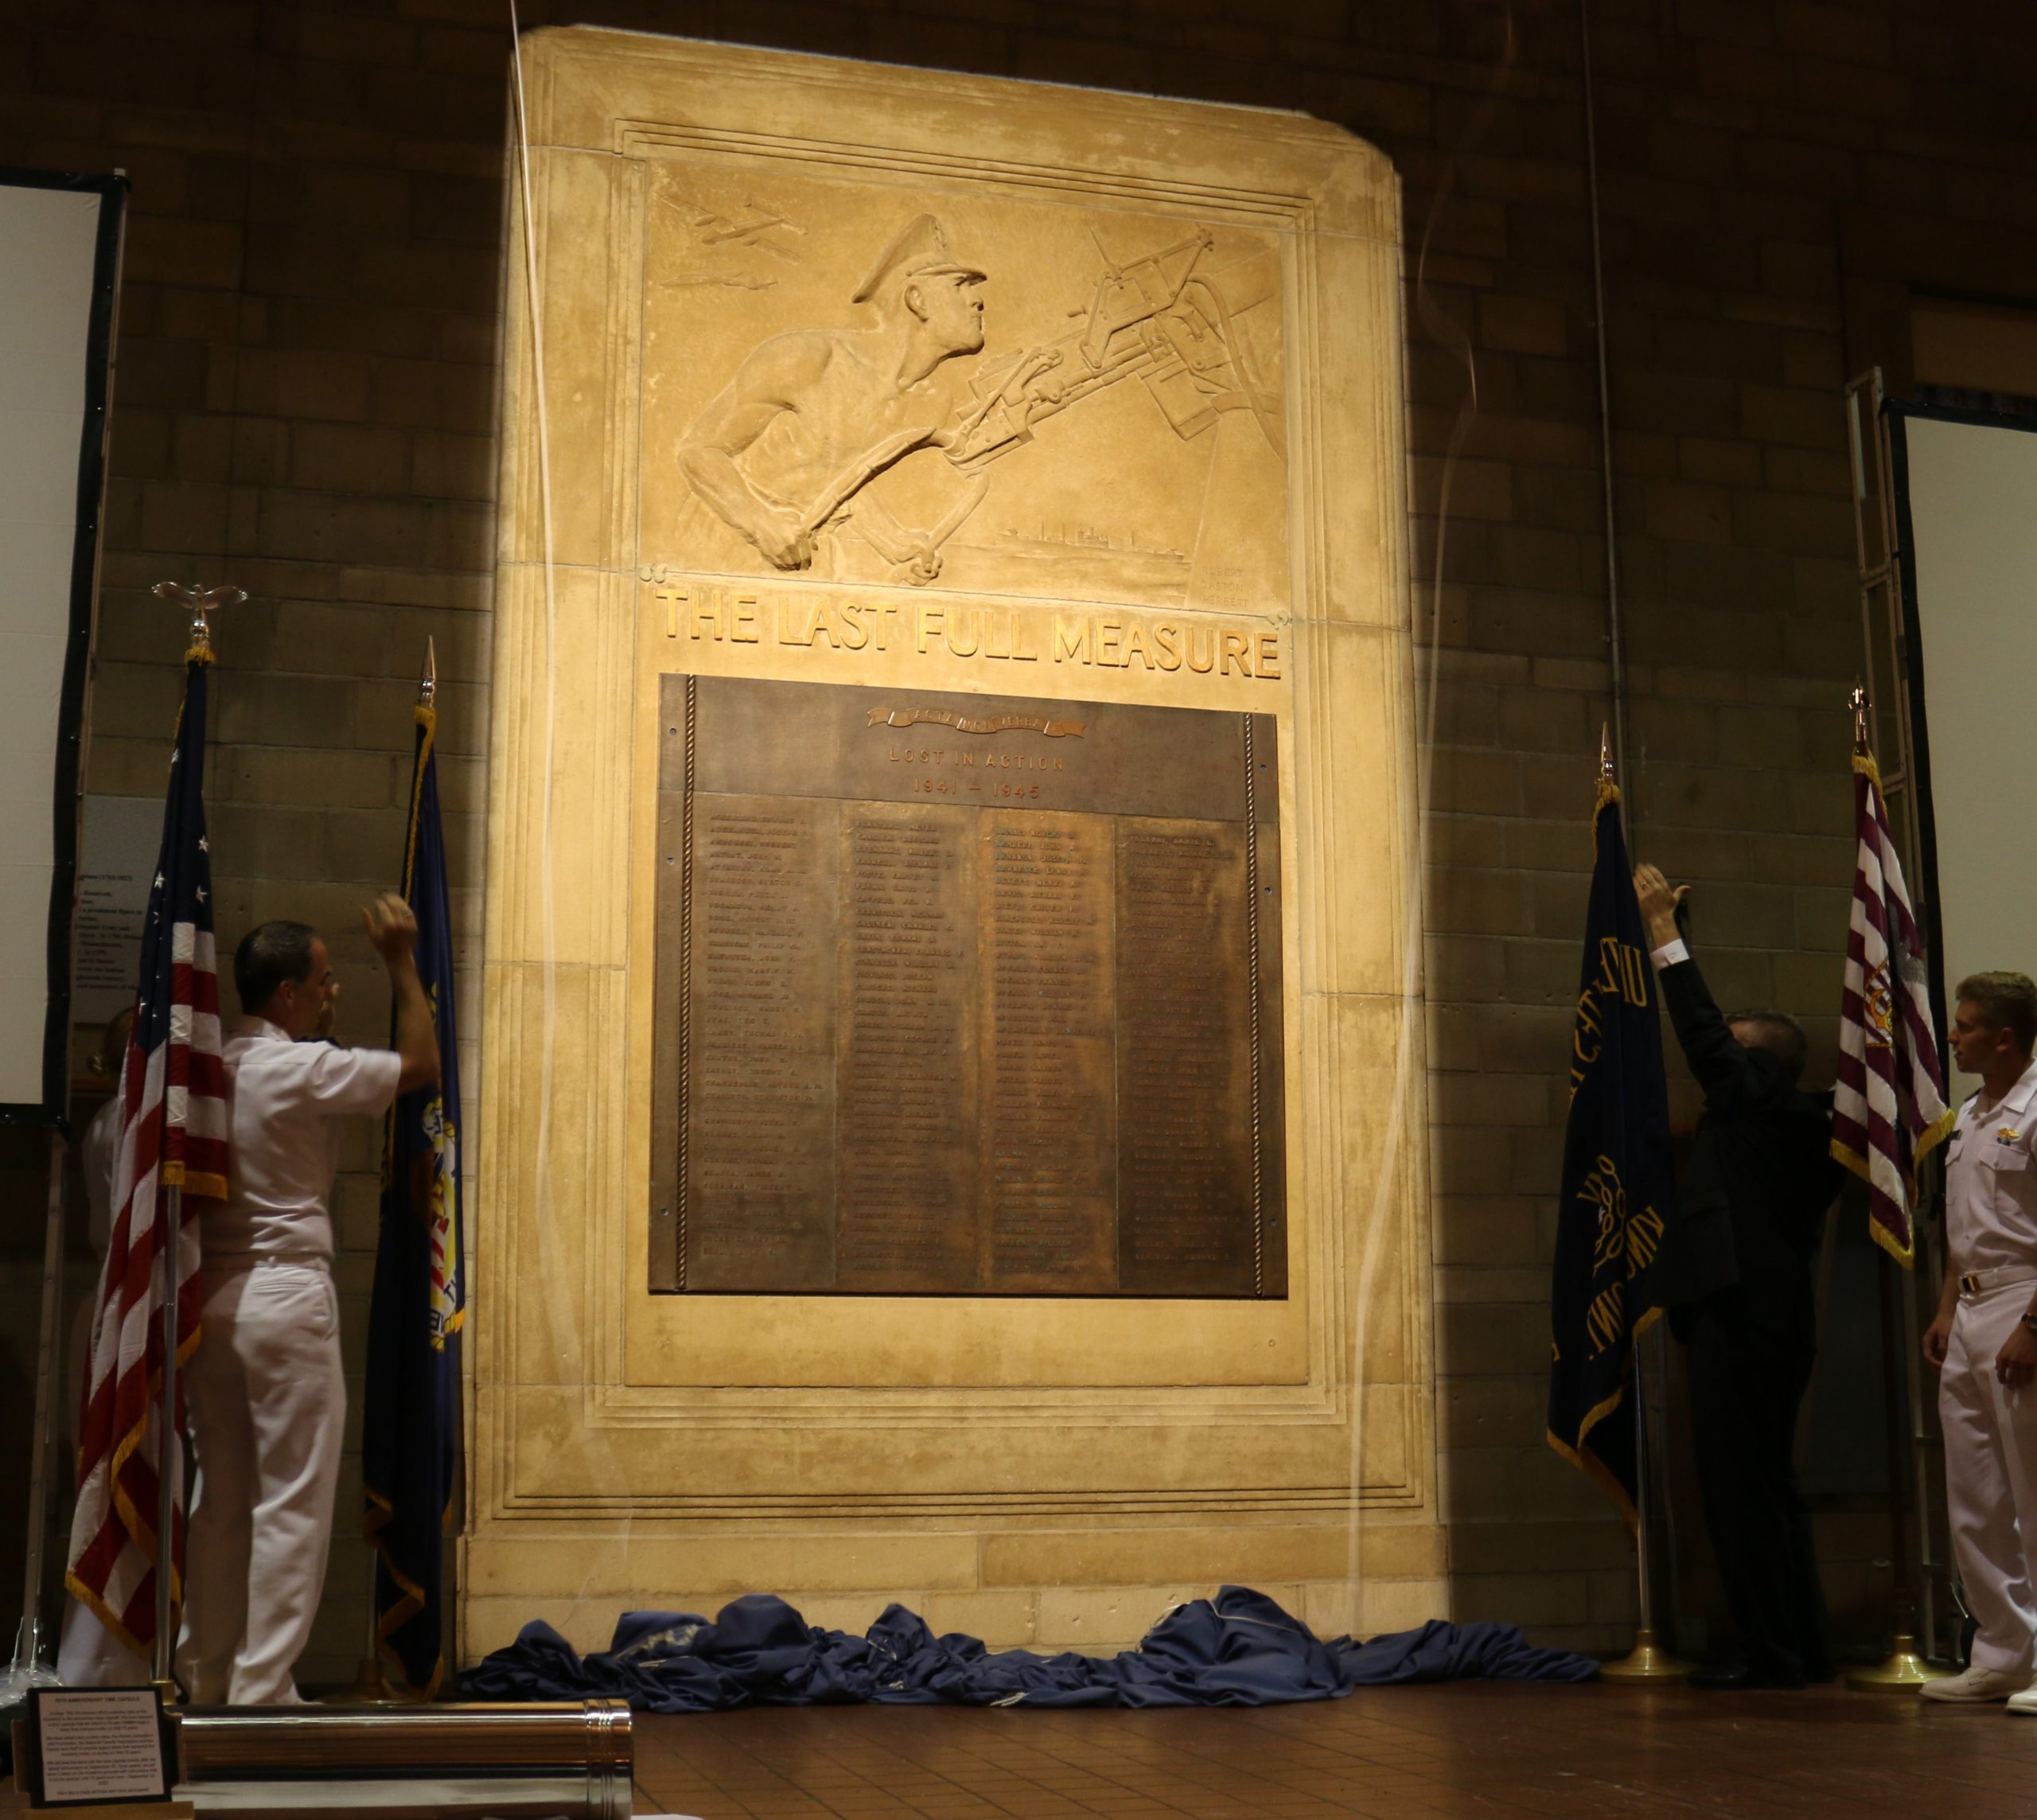 The half-relief called "The Last Full Measure," honoring the 142 Cadet-Midshipmen lost during World War II, was unveiled at USMMA last week. (Photo courtesy of the U.S. Merchant Marine Academy)